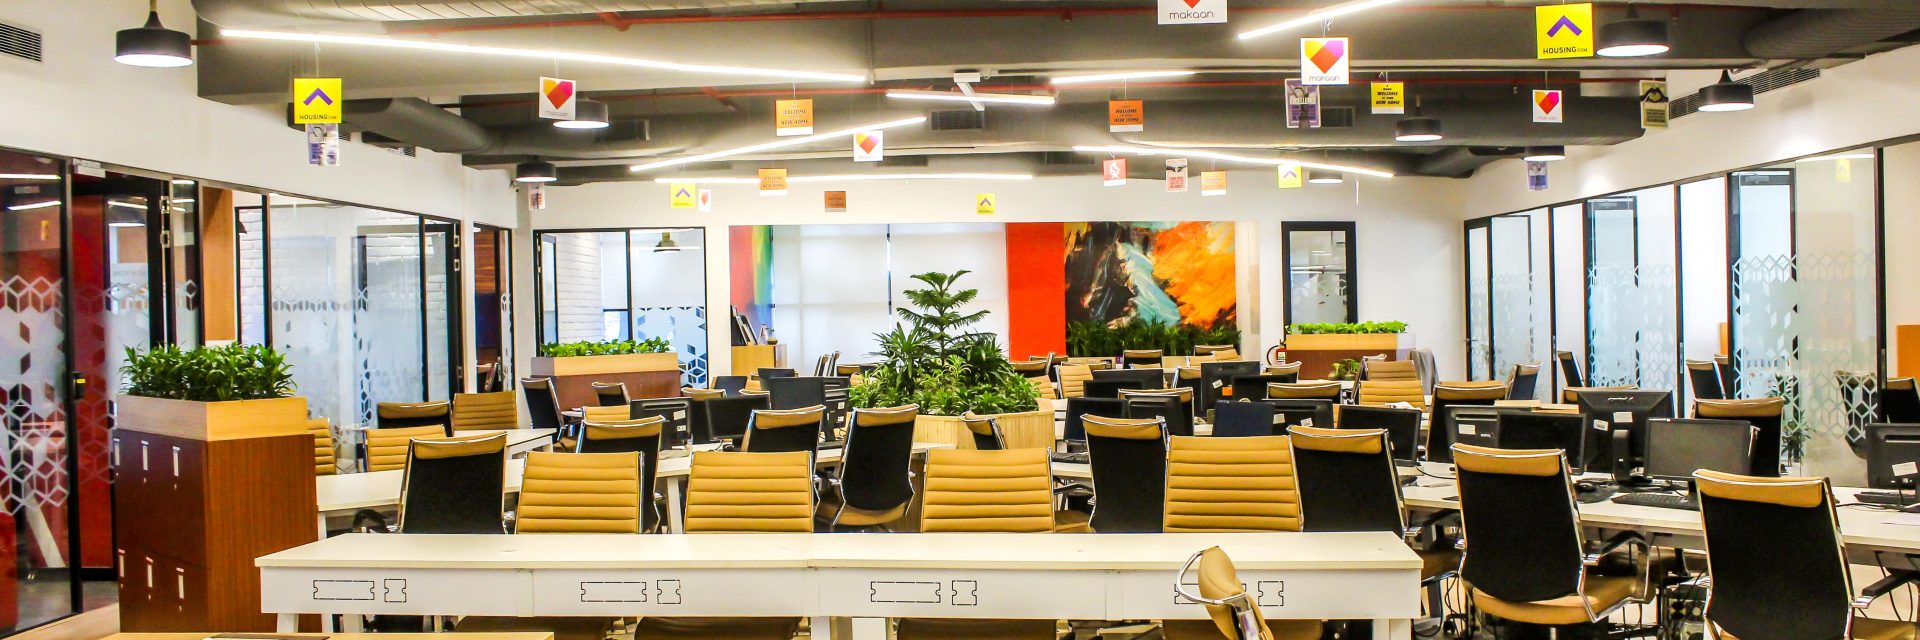 Grow your business fast with Coworking Spaces